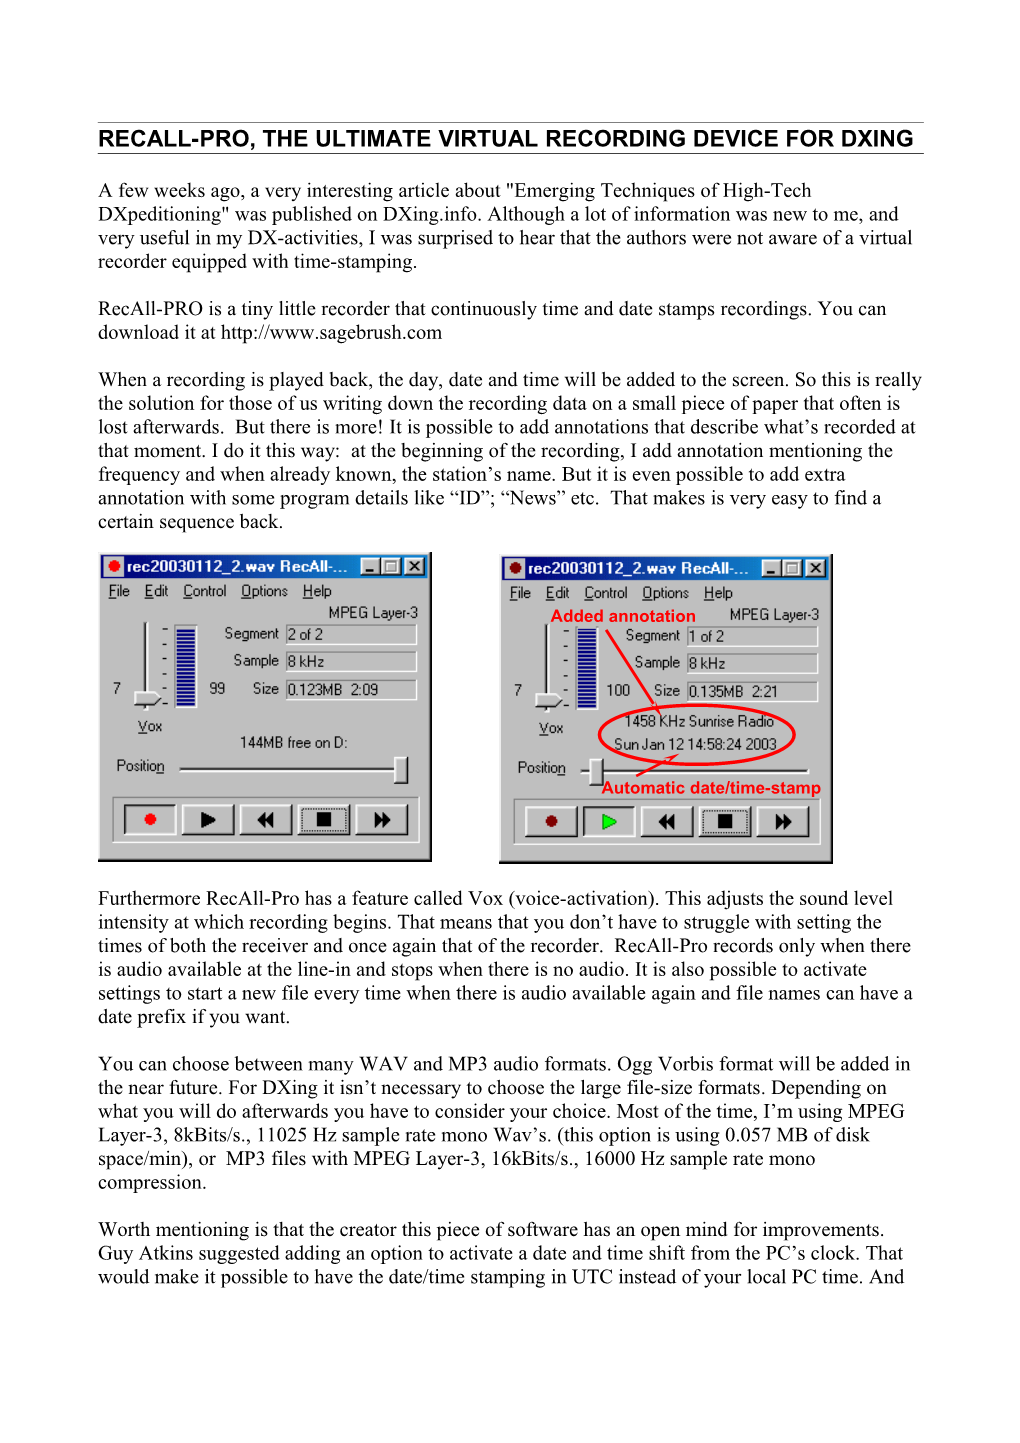 Recall-Pro, the Ultimate Virtual Recording Device for Dxing